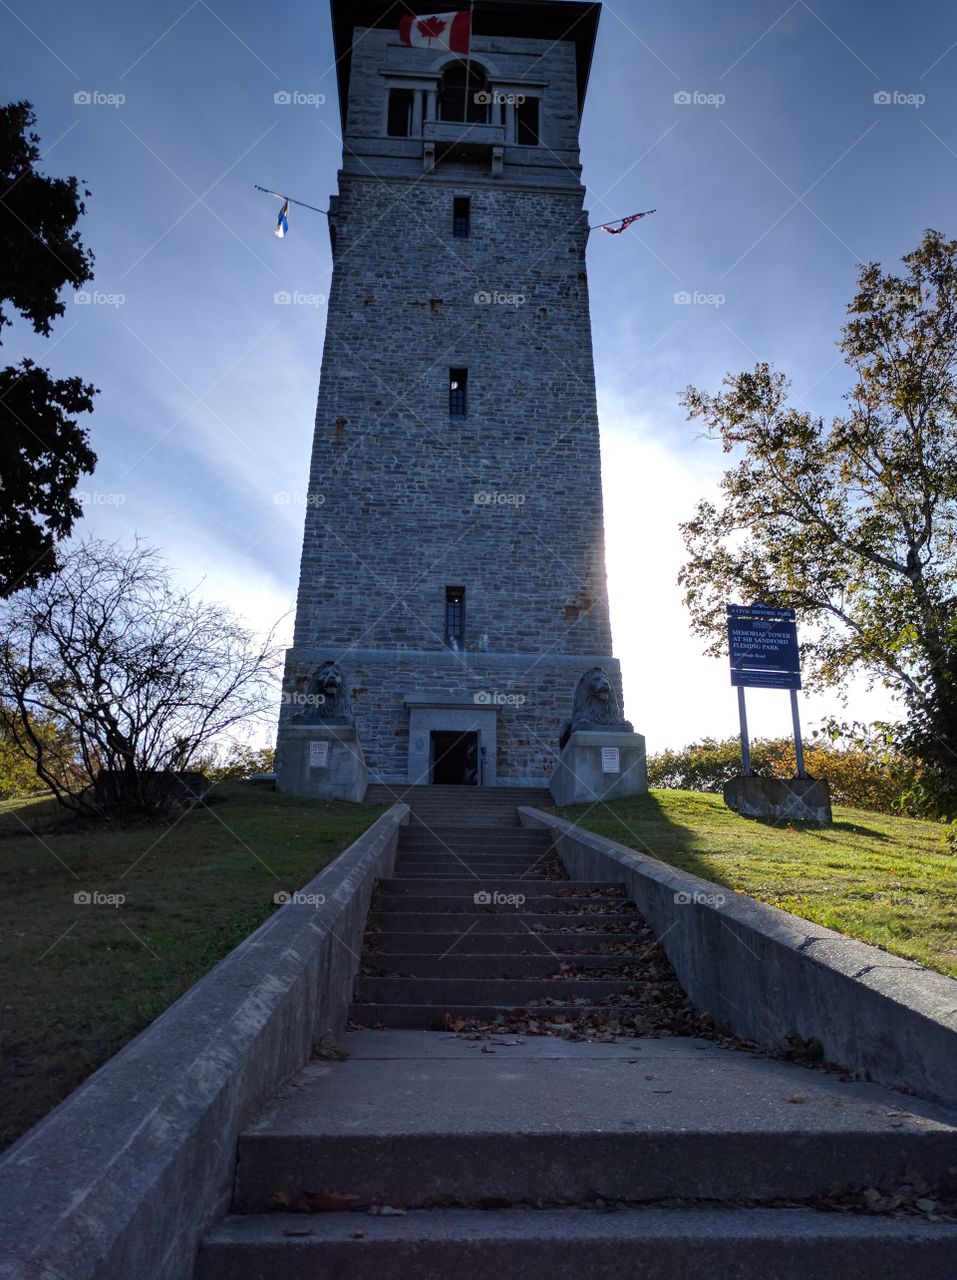 Dingle tower in Halifax NS